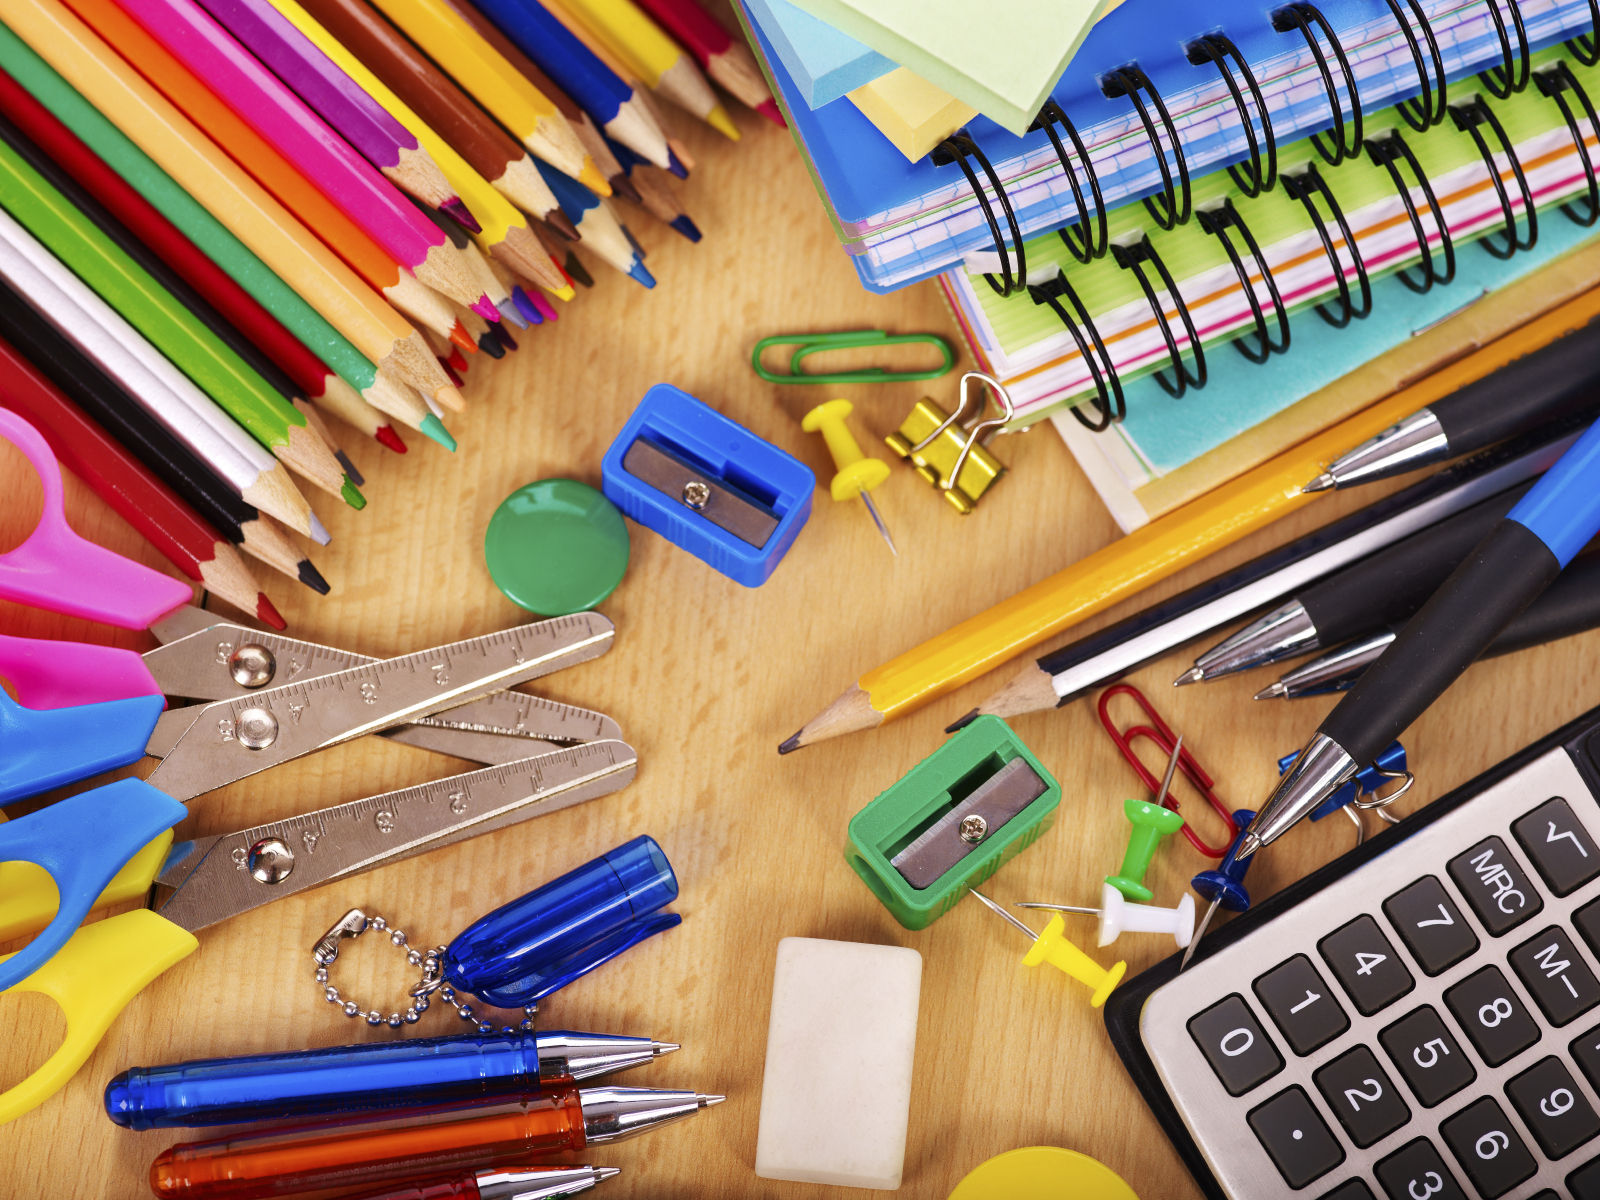 Children's School Supplies and Stationery Regulations in the US